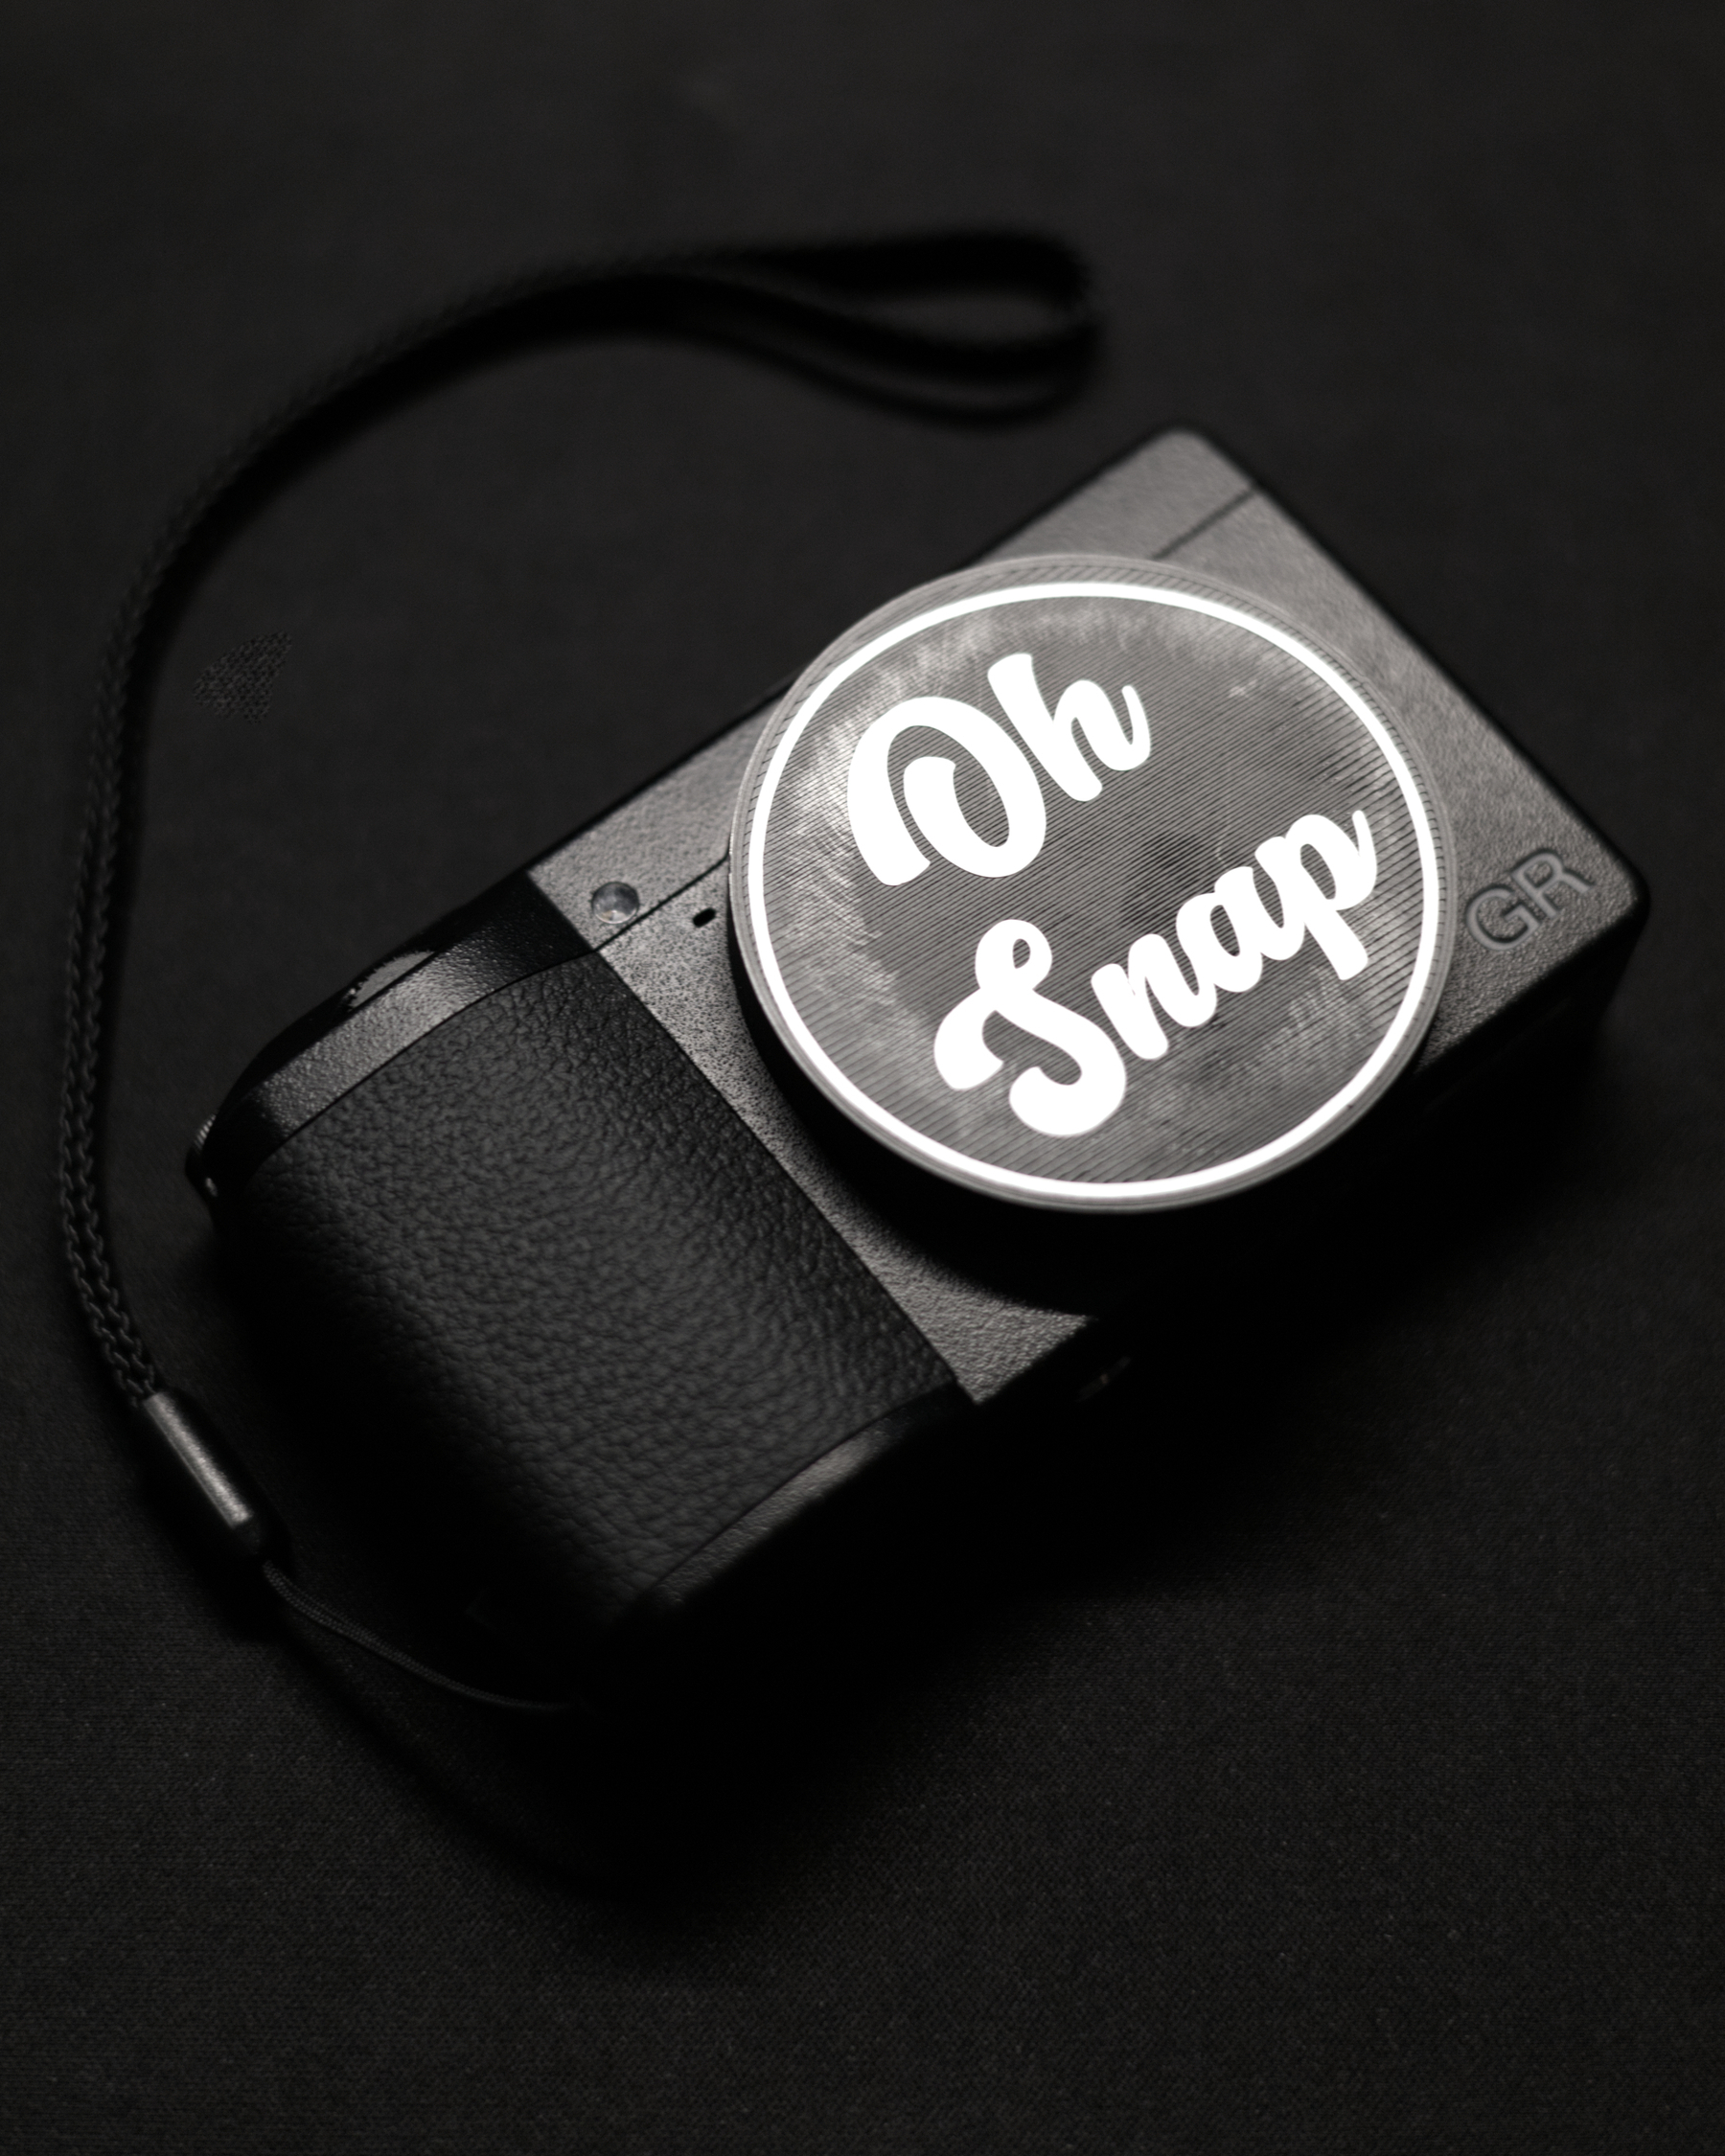 My black Ricoh GR III with a black 3D printed Lens Cap that says 'Oh Snap' in white vinyll lettering